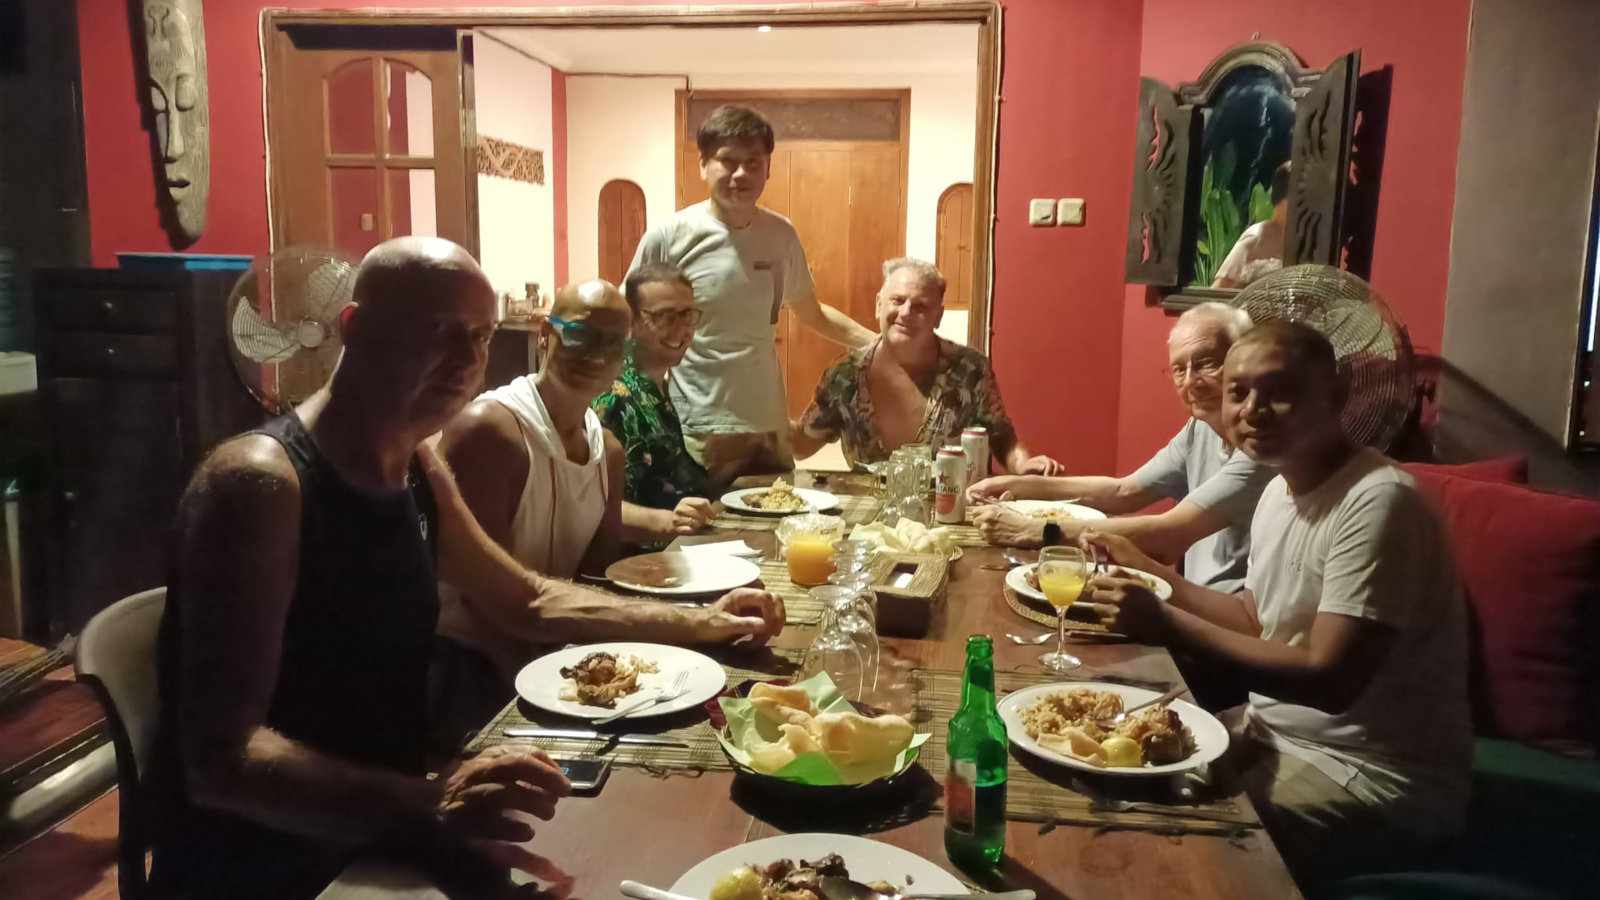 A group of men gathered around a table for a meal together.